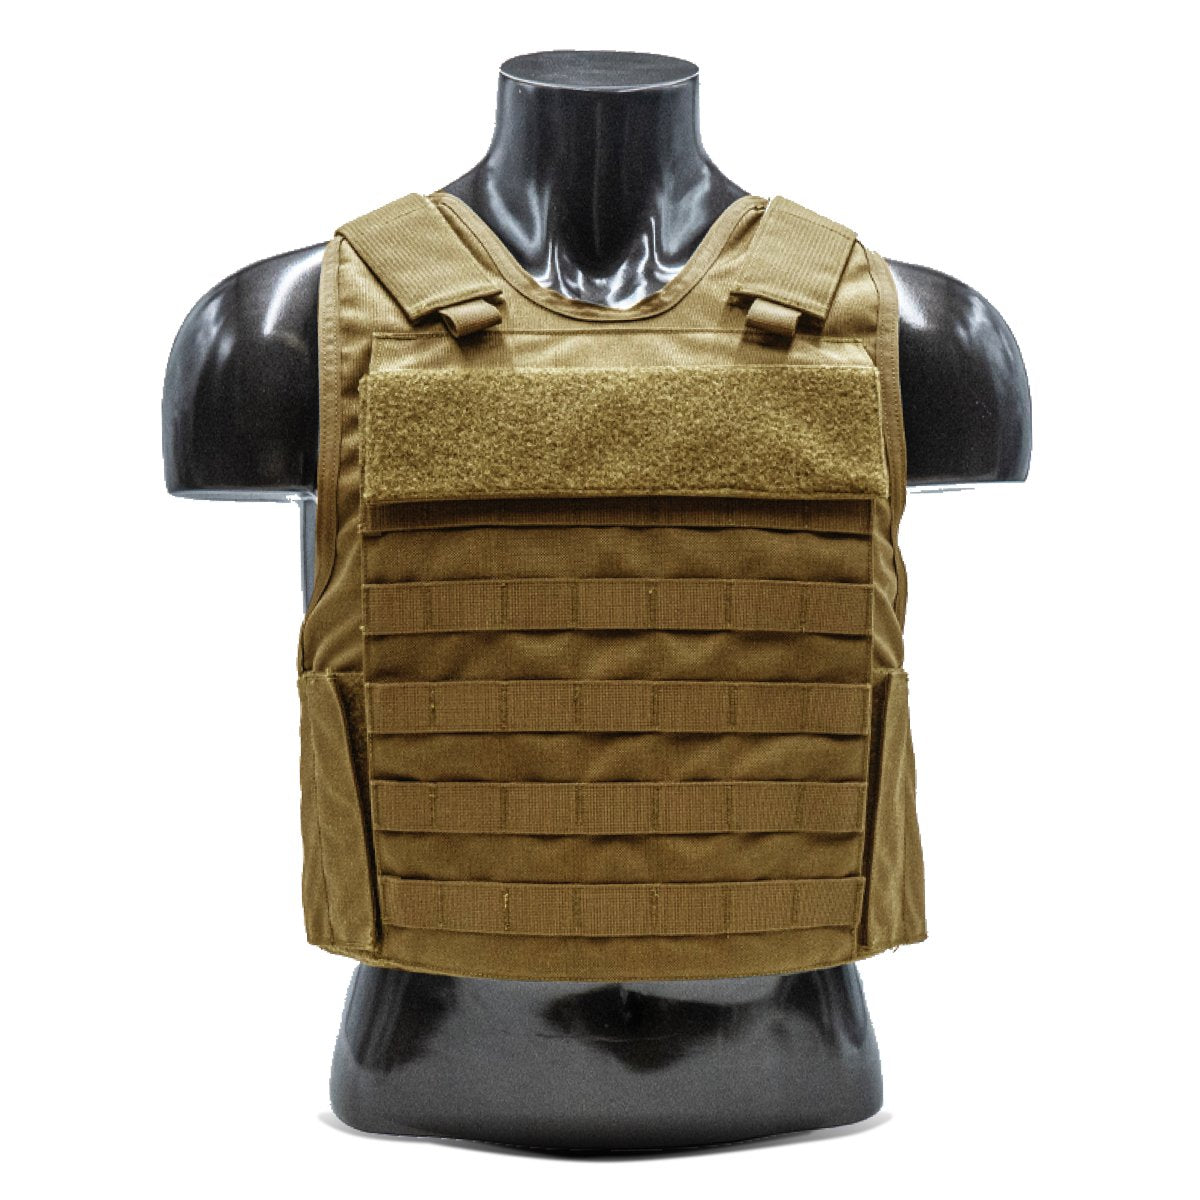 A mannequin mannequin wearing a Body Armor Direct All Star Tactical Enhanced Multi-Threat Vest.